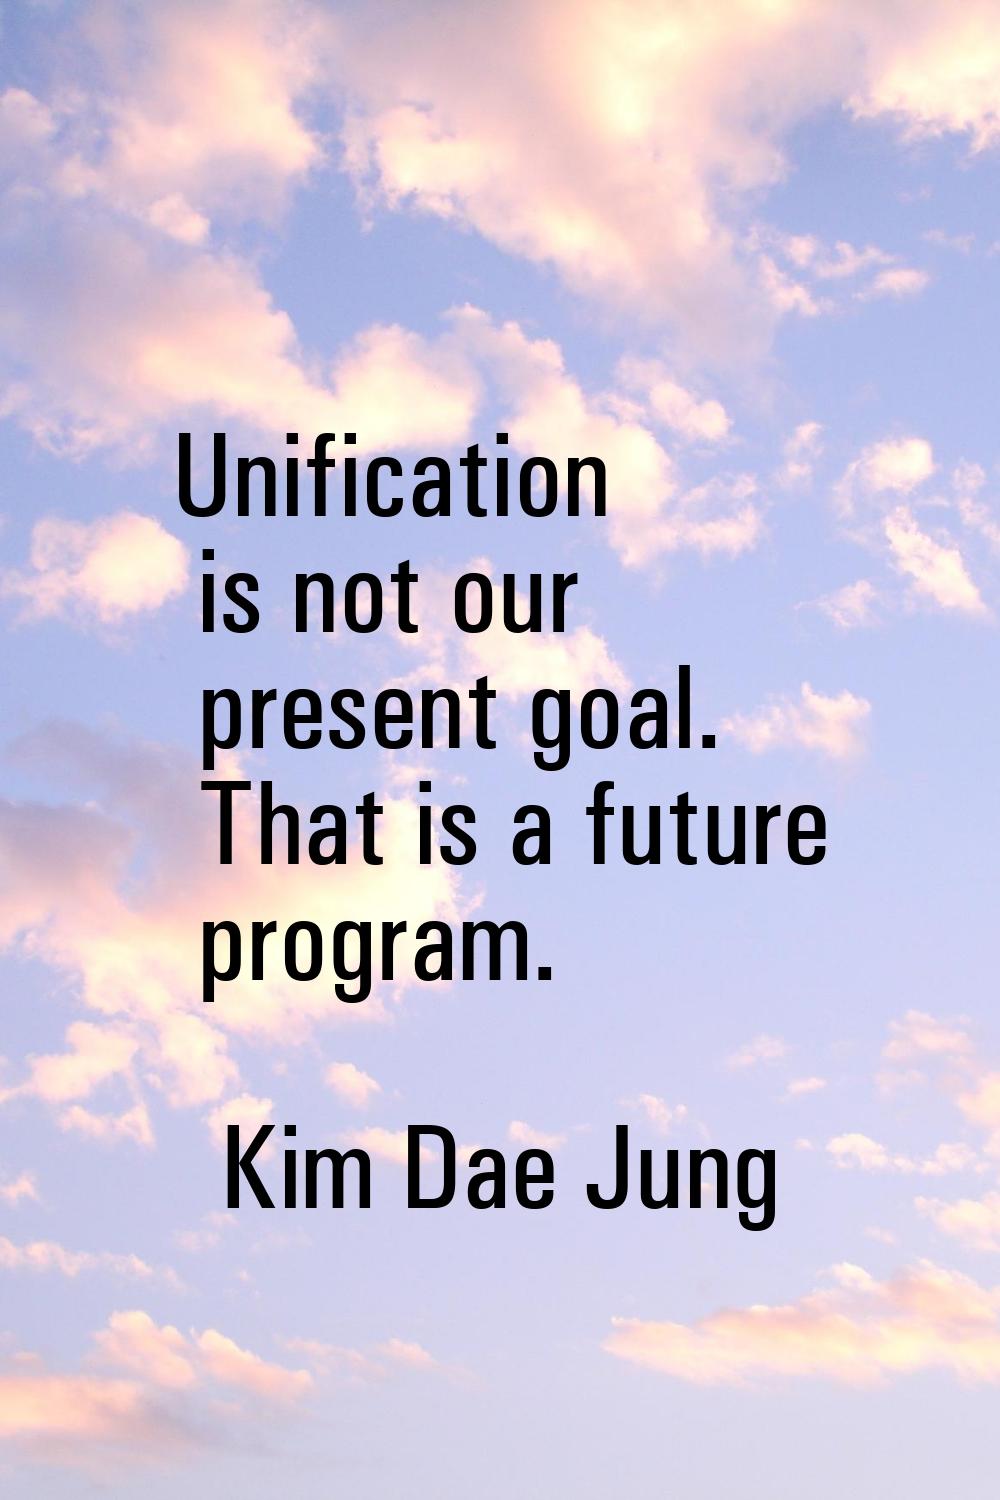 Unification is not our present goal. That is a future program.